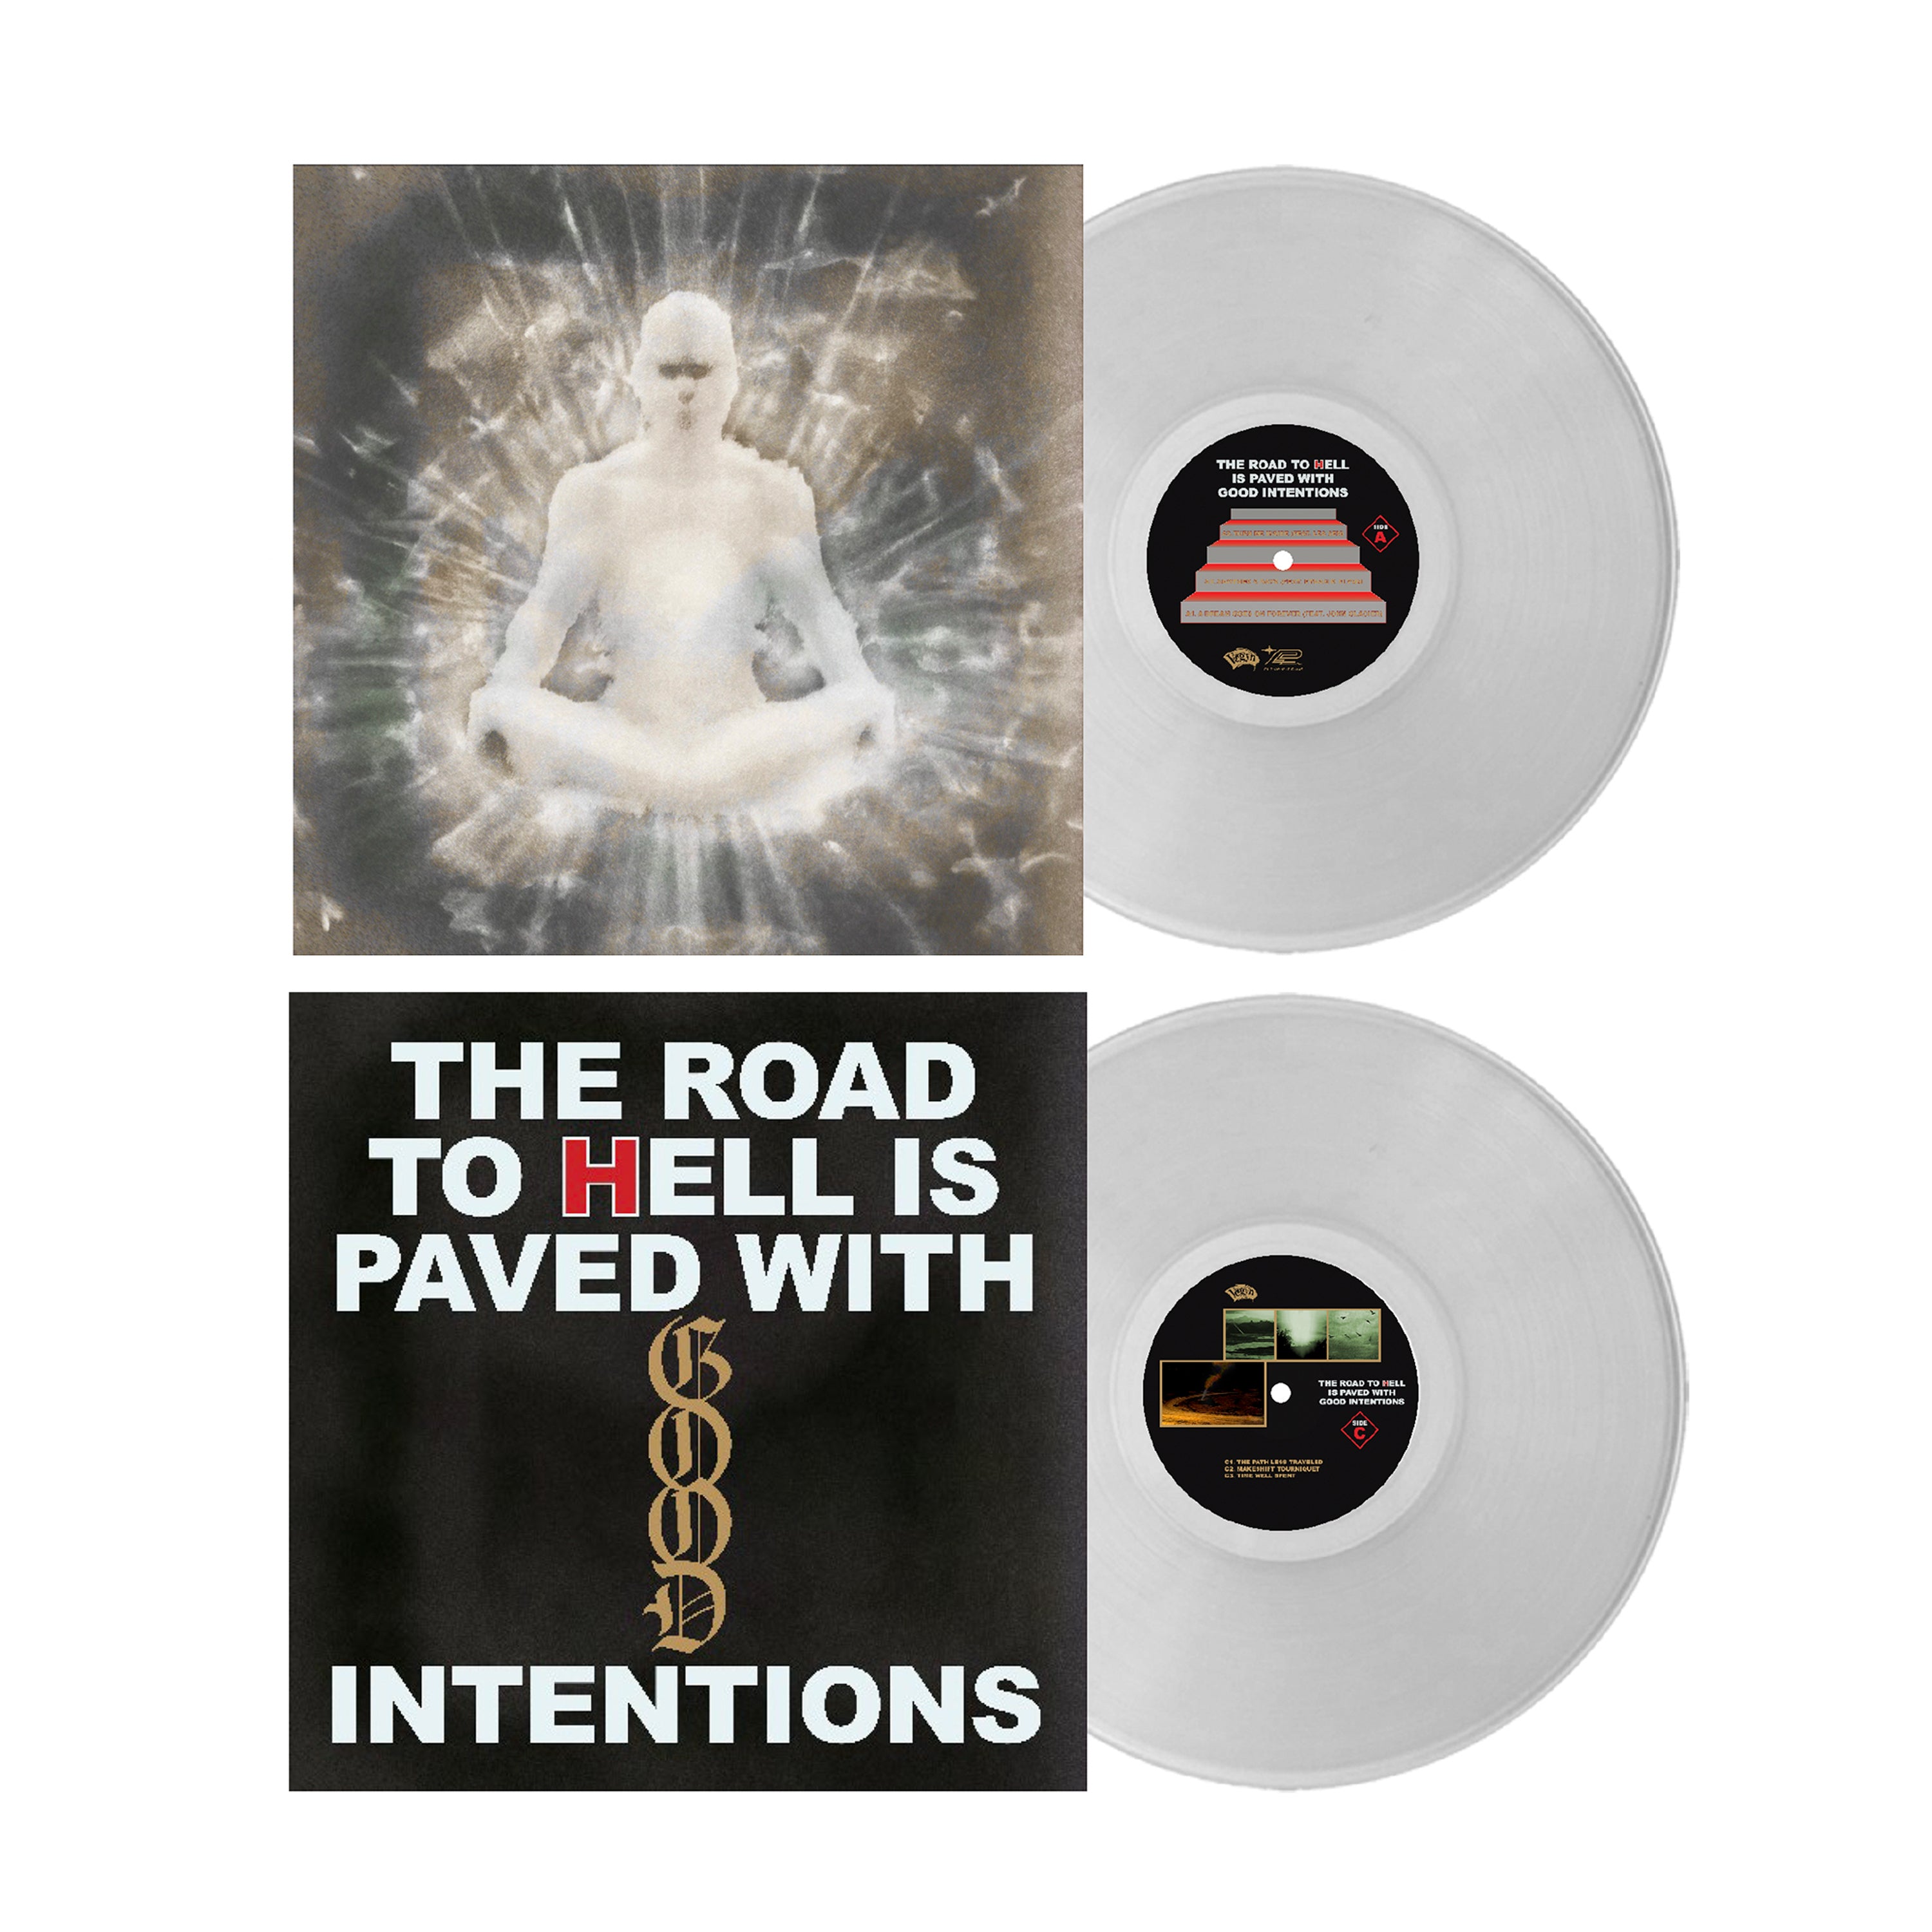 Vegyn - The Road To Hell Is Paved With Good Intentions: Limited Silver Vinyl 2LP (w/ Origami Fold Out Sleeve)